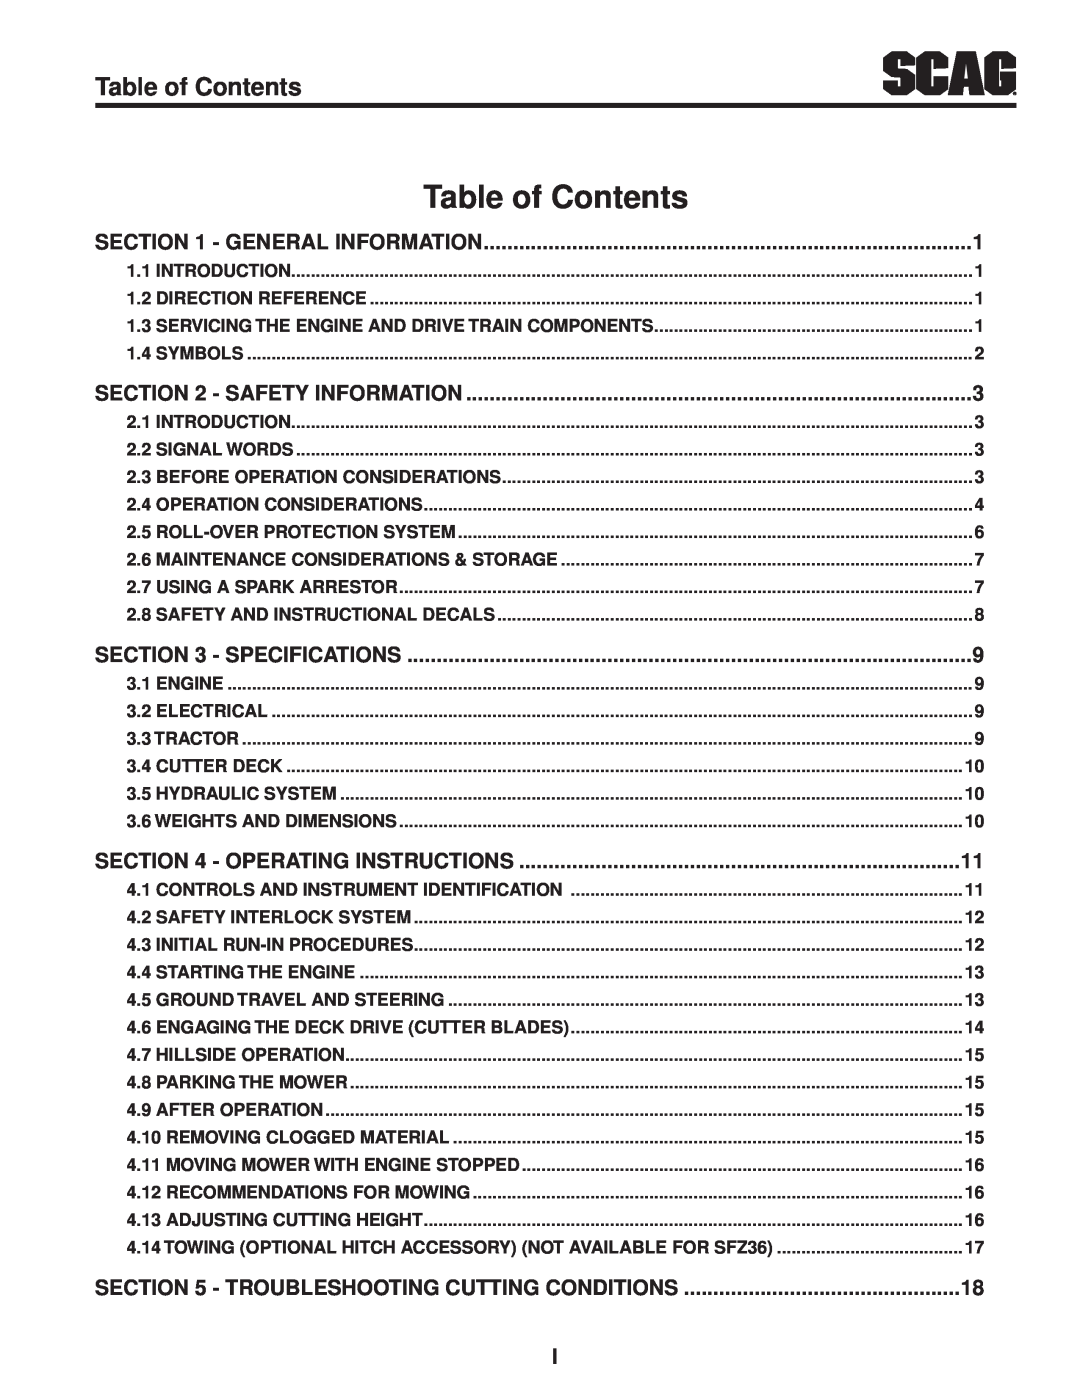 Scag Power Equipment SFZ36-20BS Table of Contents, General Information, Safety Information, Specifications, Introduction 